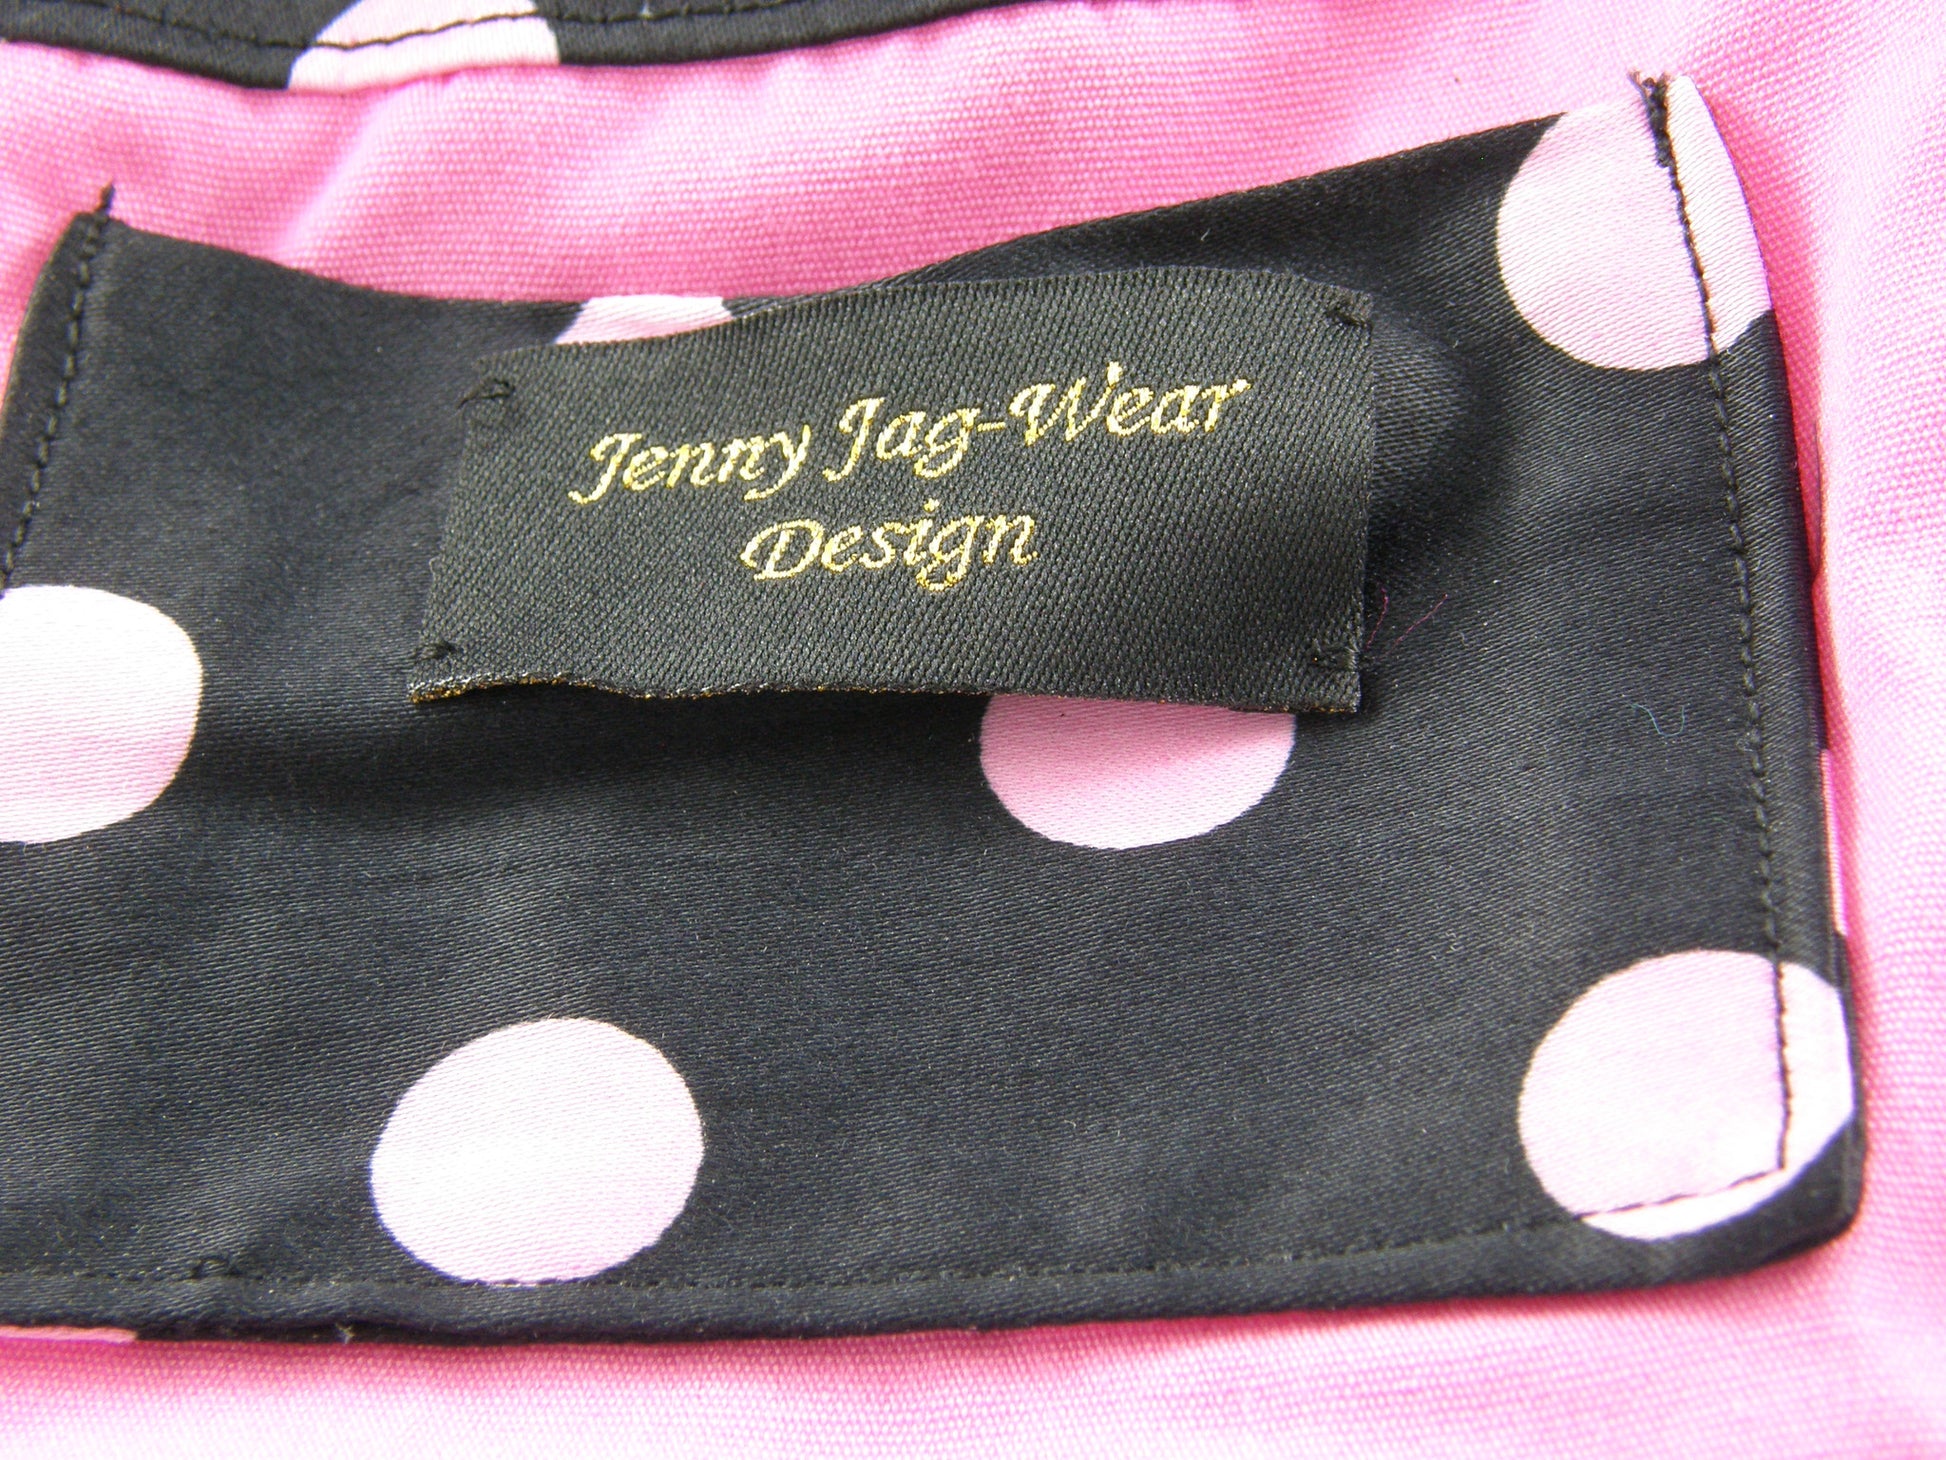 Black and Pink Evening Bag from Jenny Jag-Wear Design. The photo shows inside lining to this compact ladies evening bag. The purse is lined in bubble gum pink with inside pocket in the same black and pink polka dots as the outside. The Merle Collection from Jenny Jag-Wear Design.